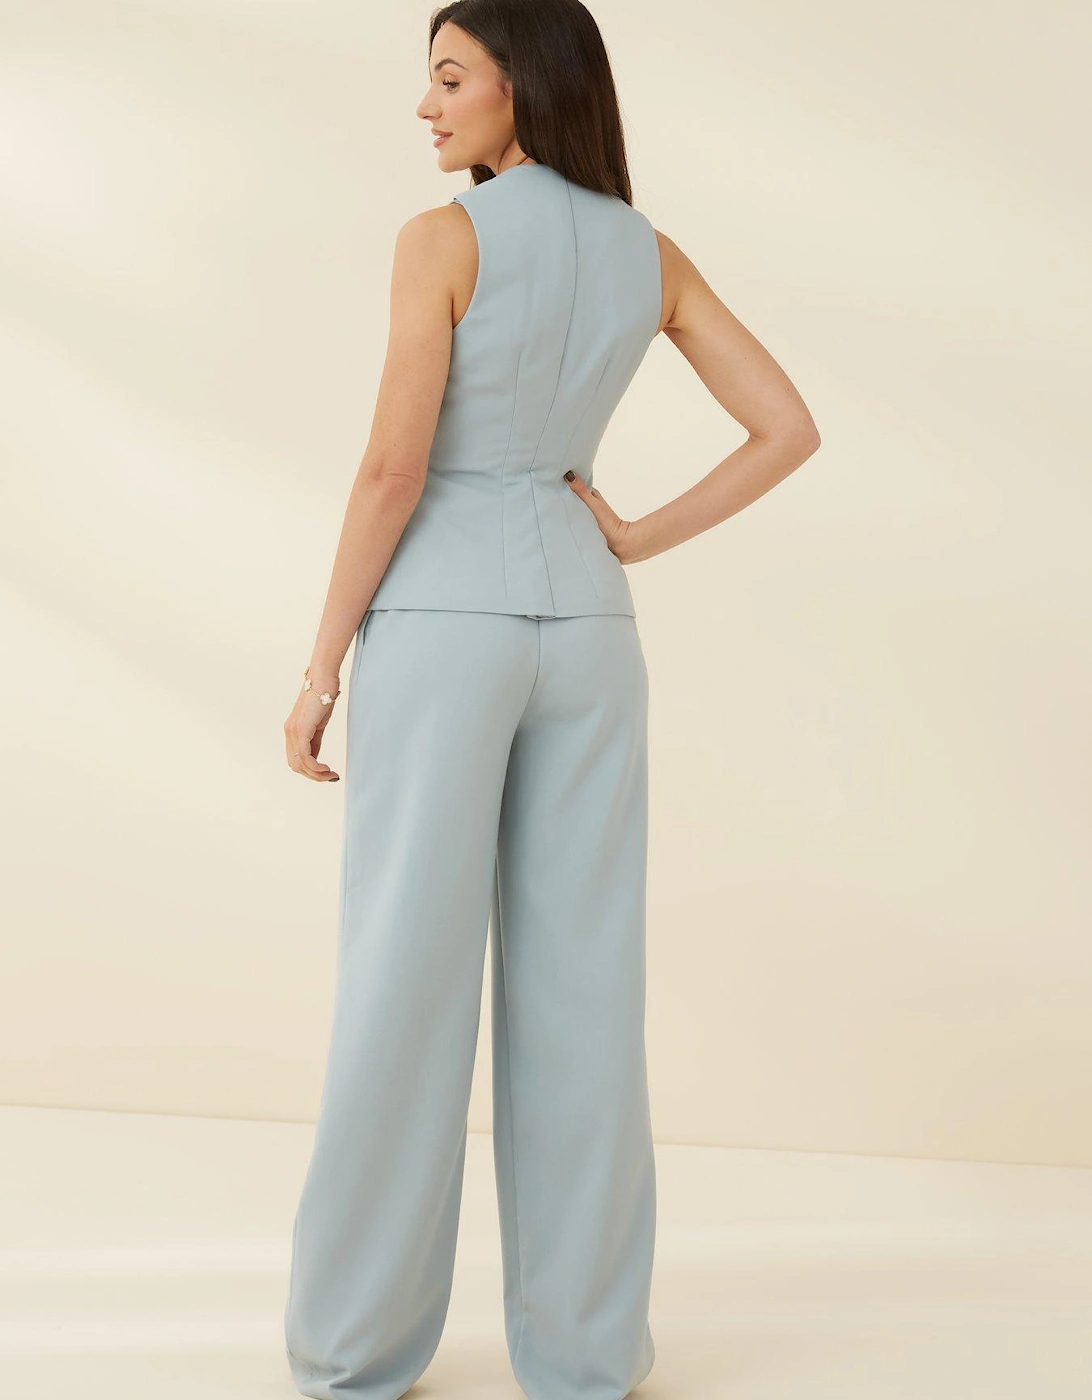 Co-Ord Formal Tailored Wide Leg Trousers - Dusky Blue